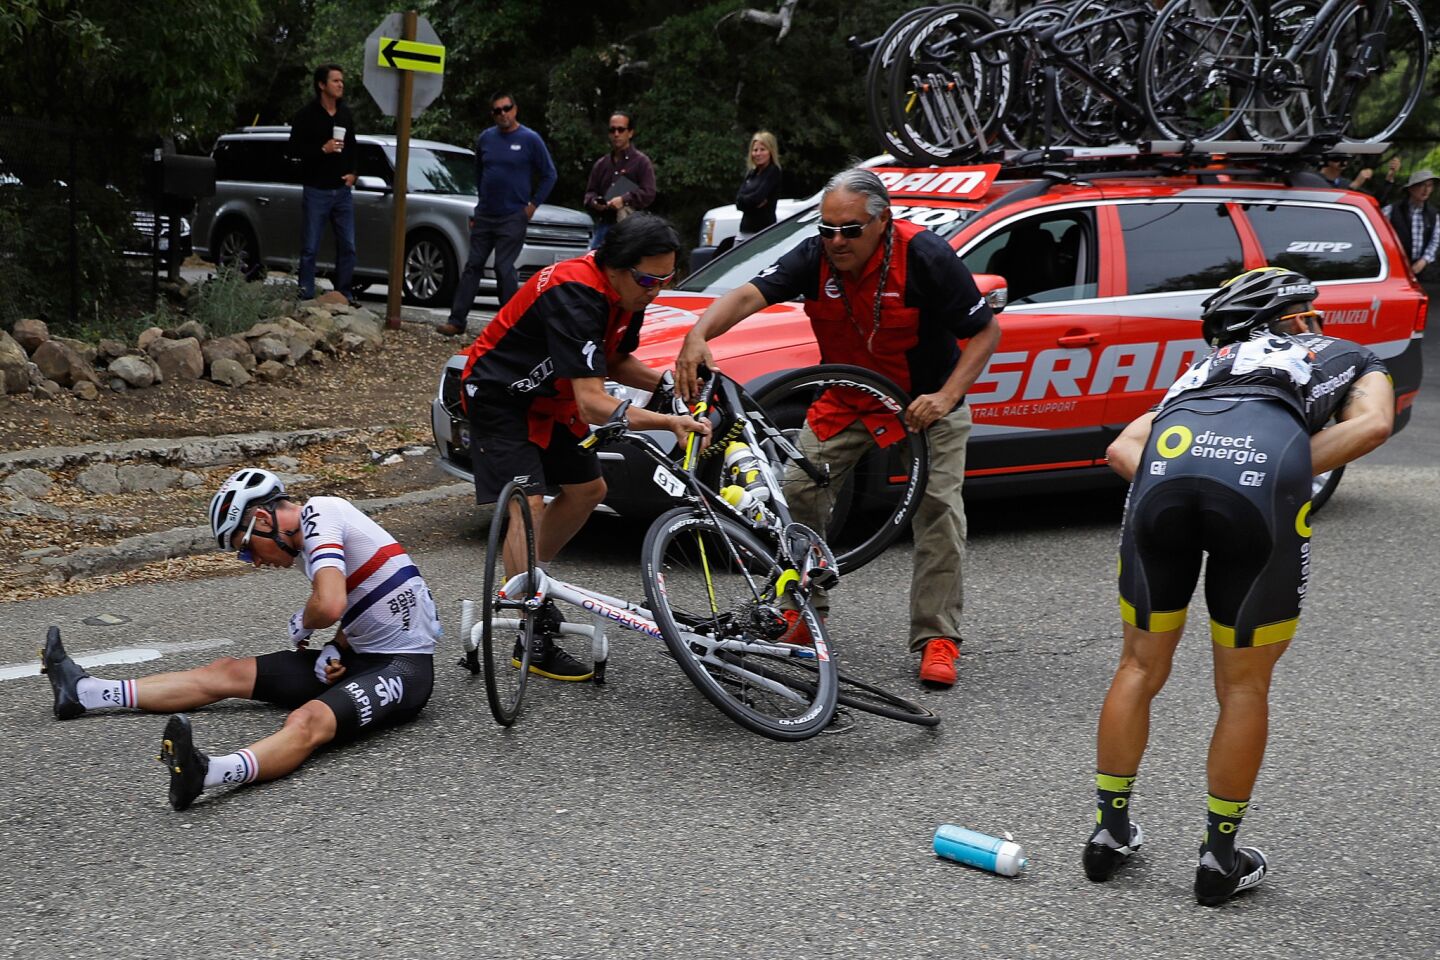 Britain's Peter Kennaugh, left, and France's Bryan Coquard were involved in a crash during the third stage of the Tour of California on May 17.